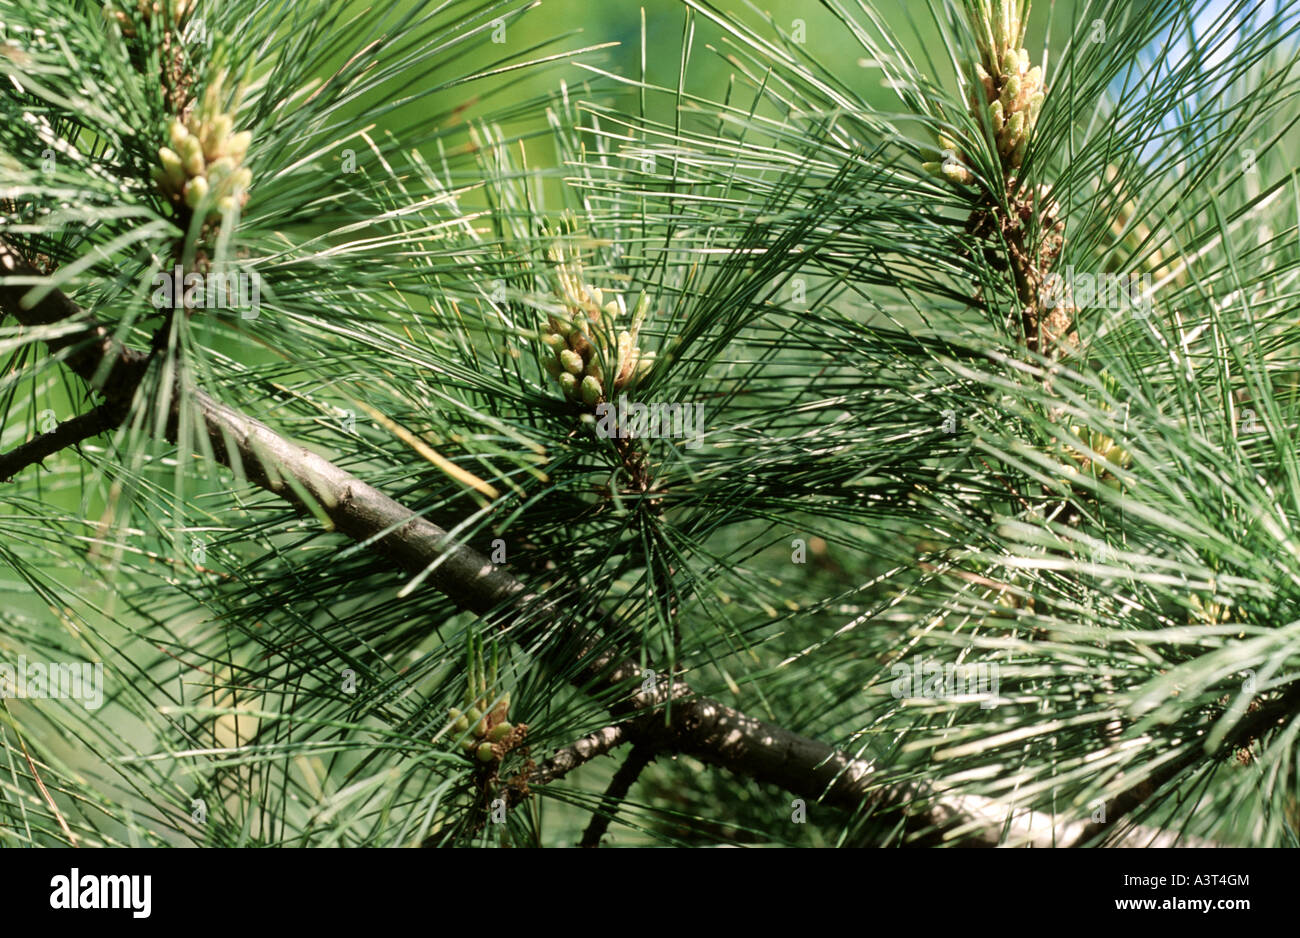 eastern white pine (Pinus strobus), branch with male inflorescences Stock Photo